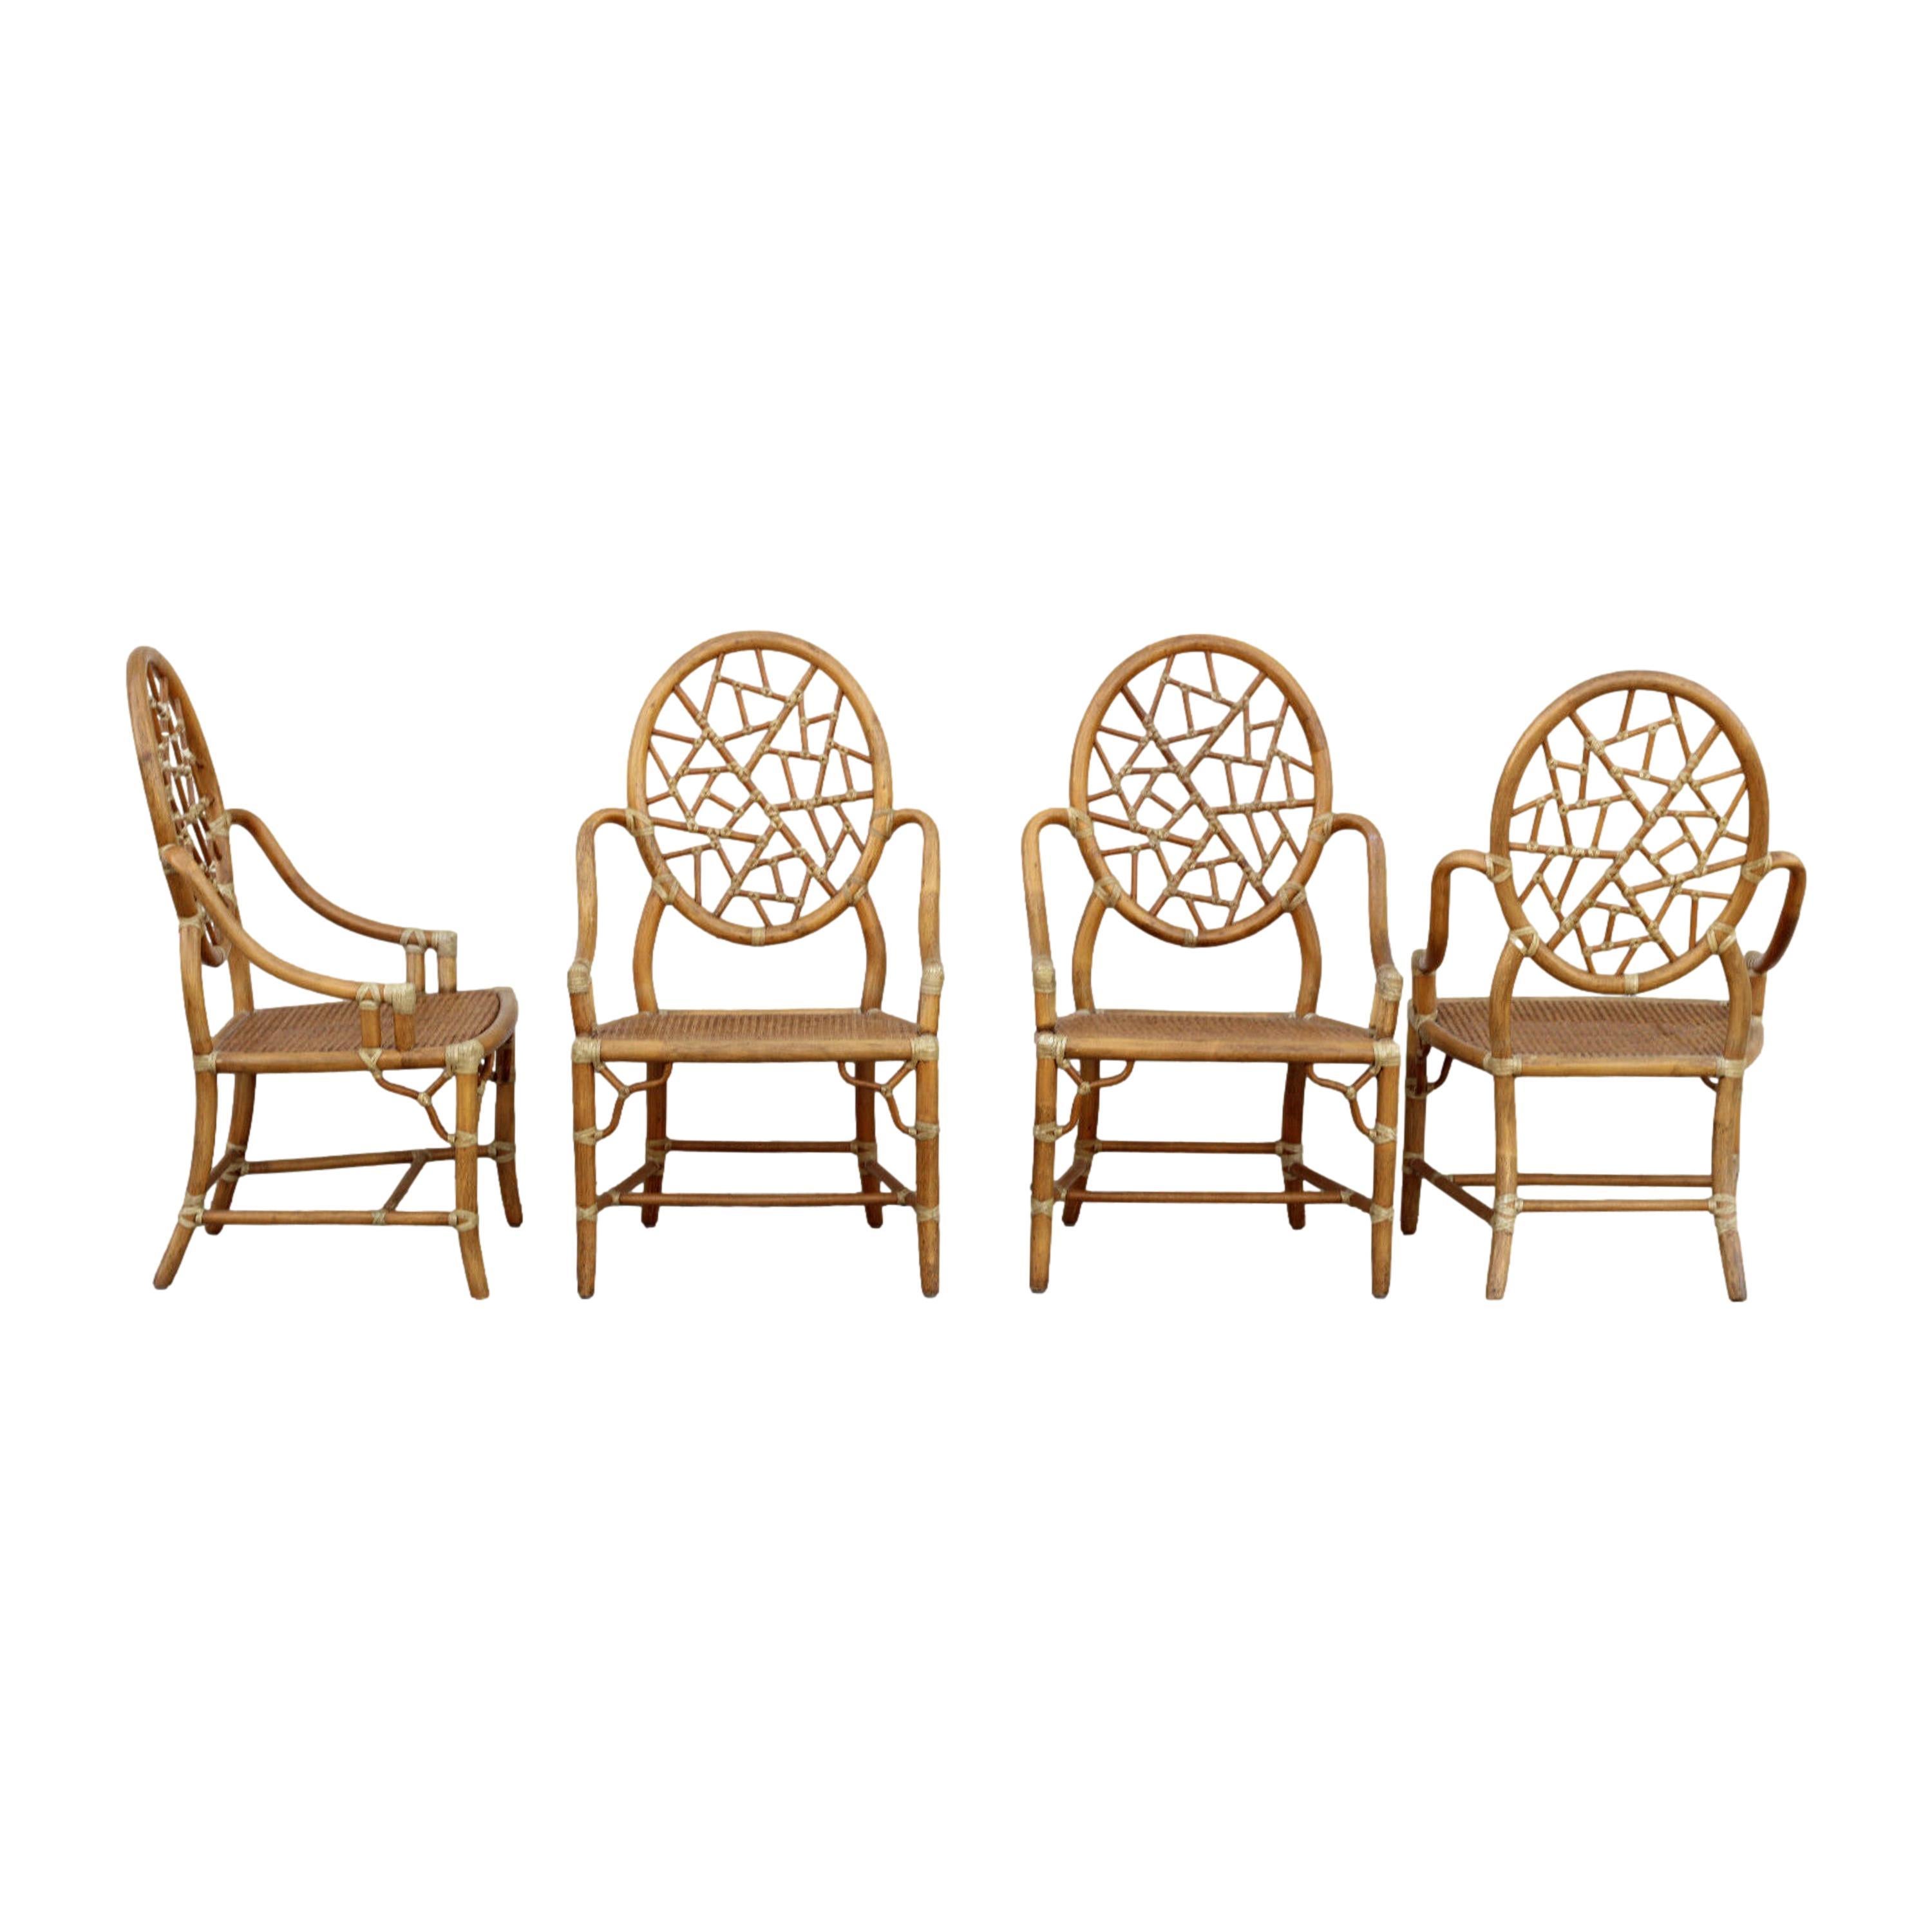 Set of four iconic cracked ice chairs designed by breakthrough innovator Elinor McGuire in 1968. The design is famous for its rattan oval back that frames smaller rattan pieces bound by rawhide, creating the impression of cracked ice or shattered